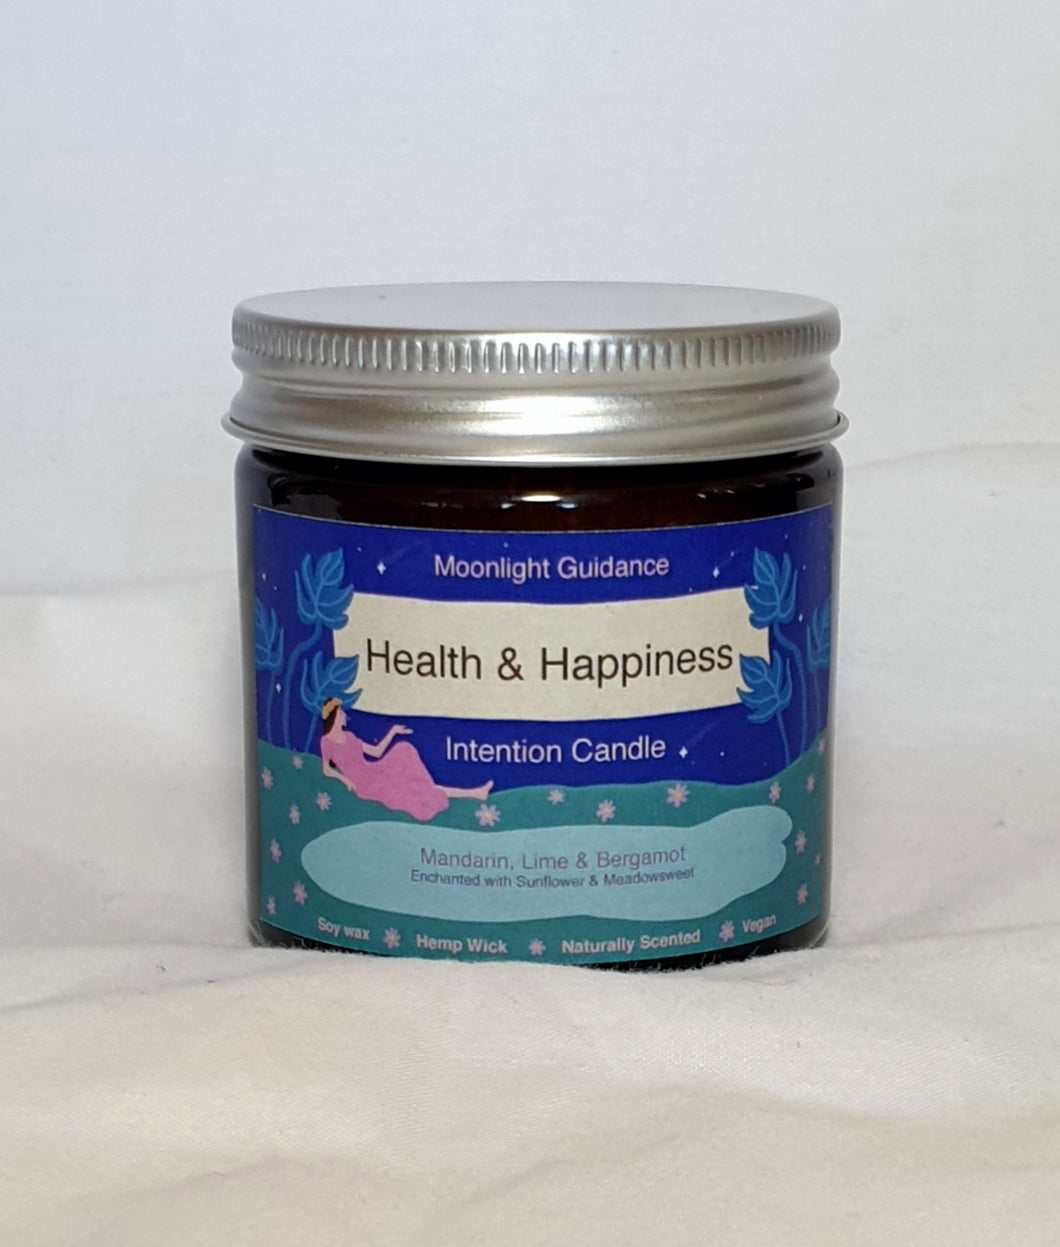 Health and Happiness Intention Candle for Manifesting Good Longterm Health, Joy, Fulfilment and Quality of Life 60ml